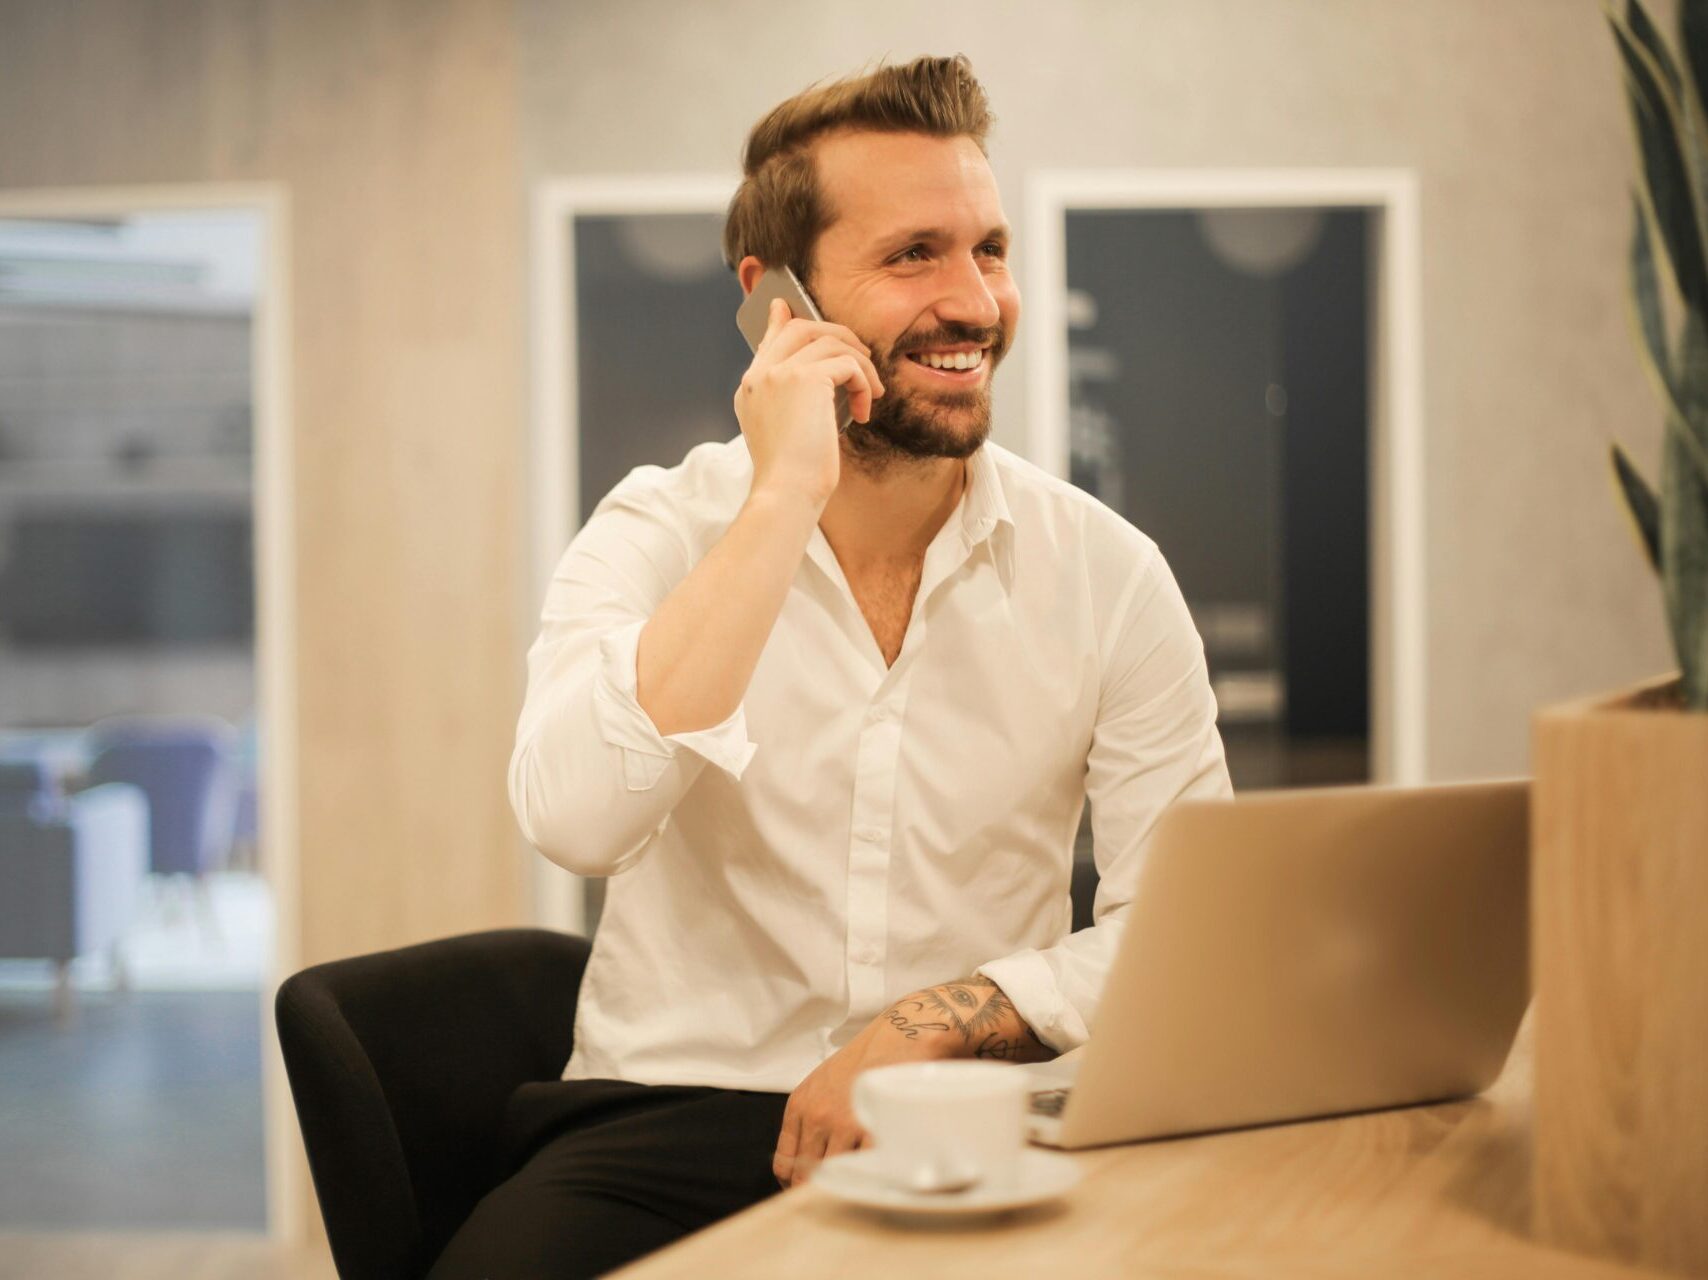 man with beard sitting at desk with laptop, on the phone smiling